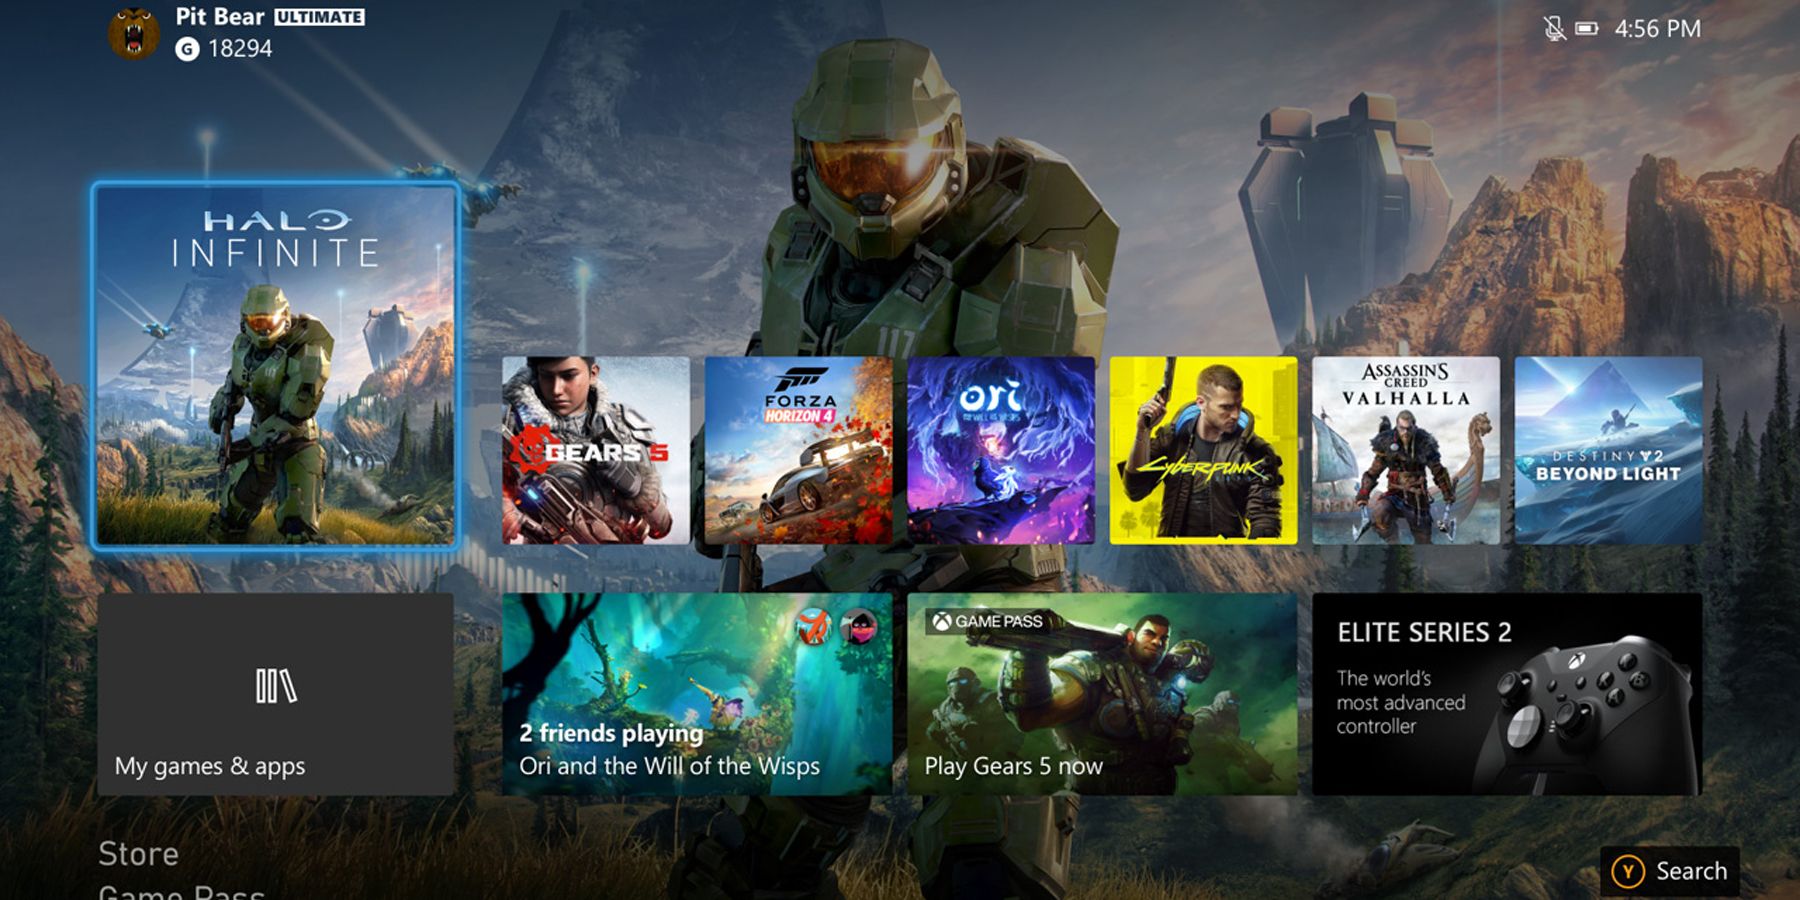 Xbox Fan Creates an Incredible Dashboard Concept That Includes 360’s